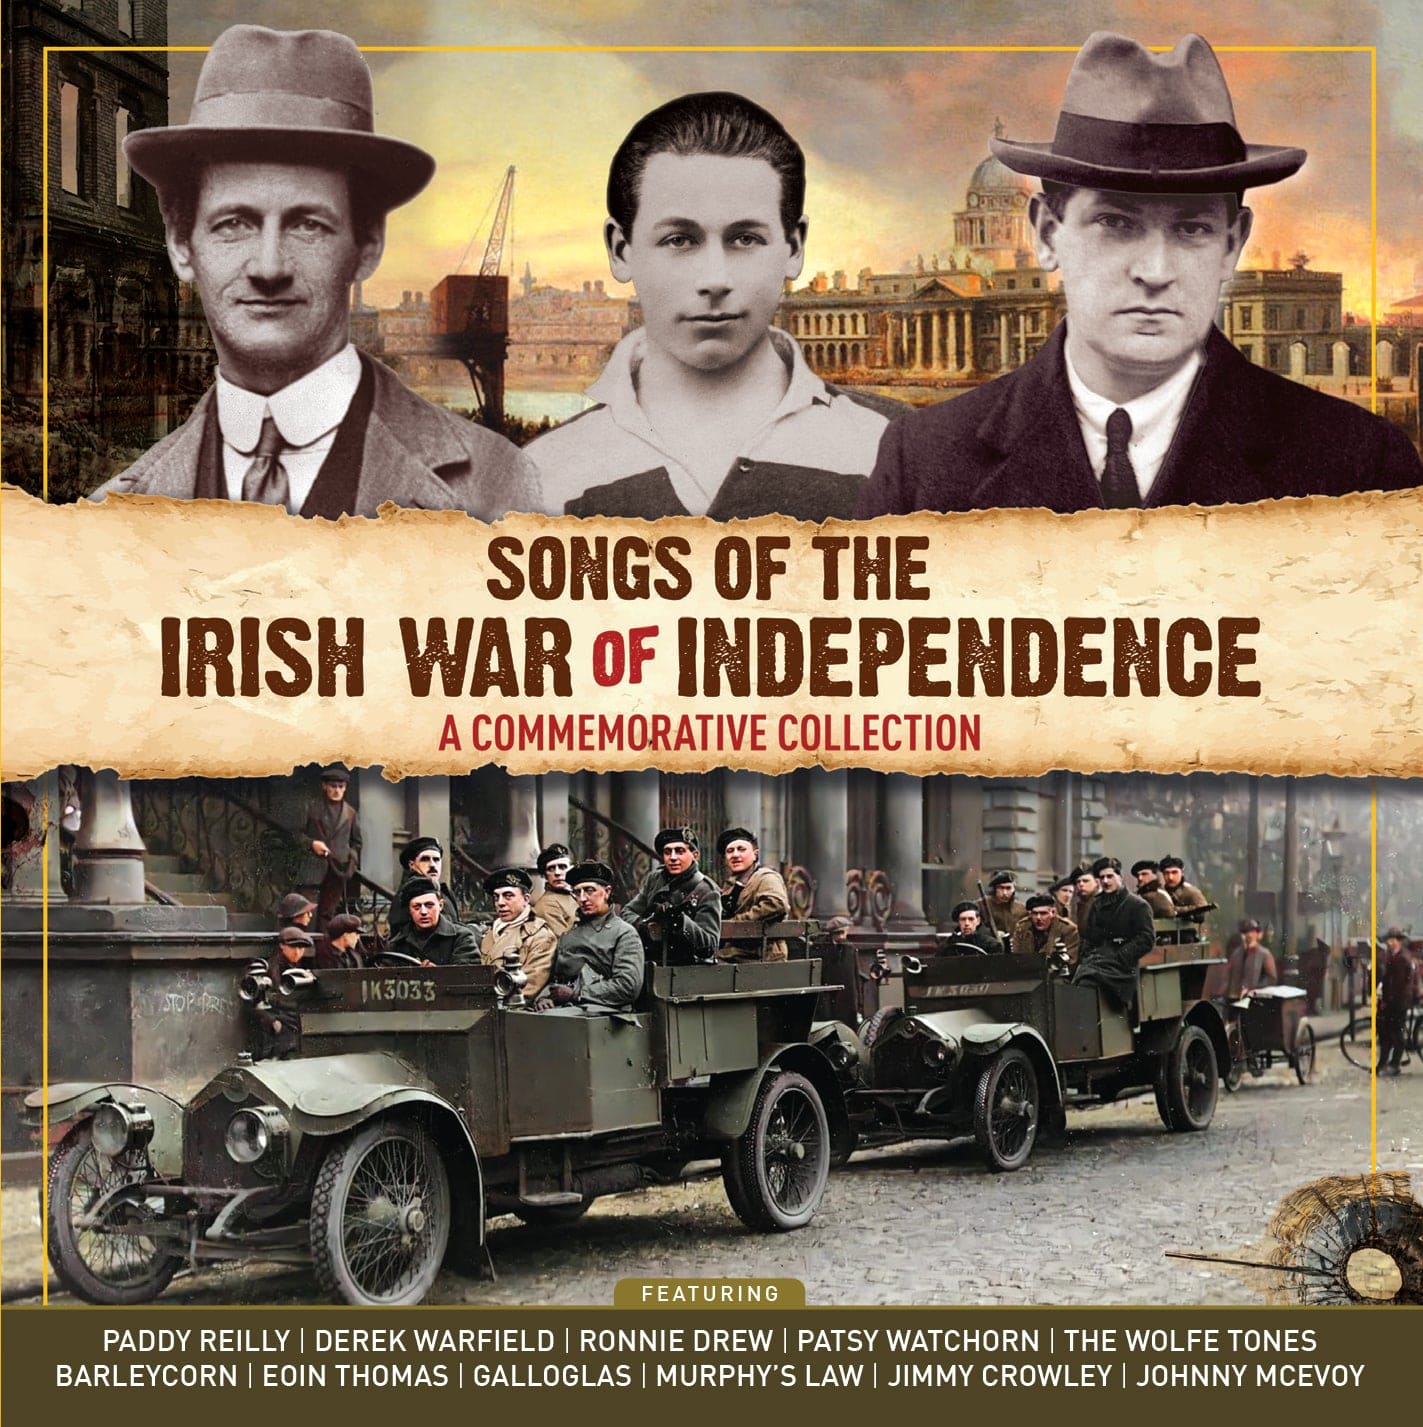 Songs of The Irish War of Independence (A Commemorative Collection) - Various Artists [2CD]